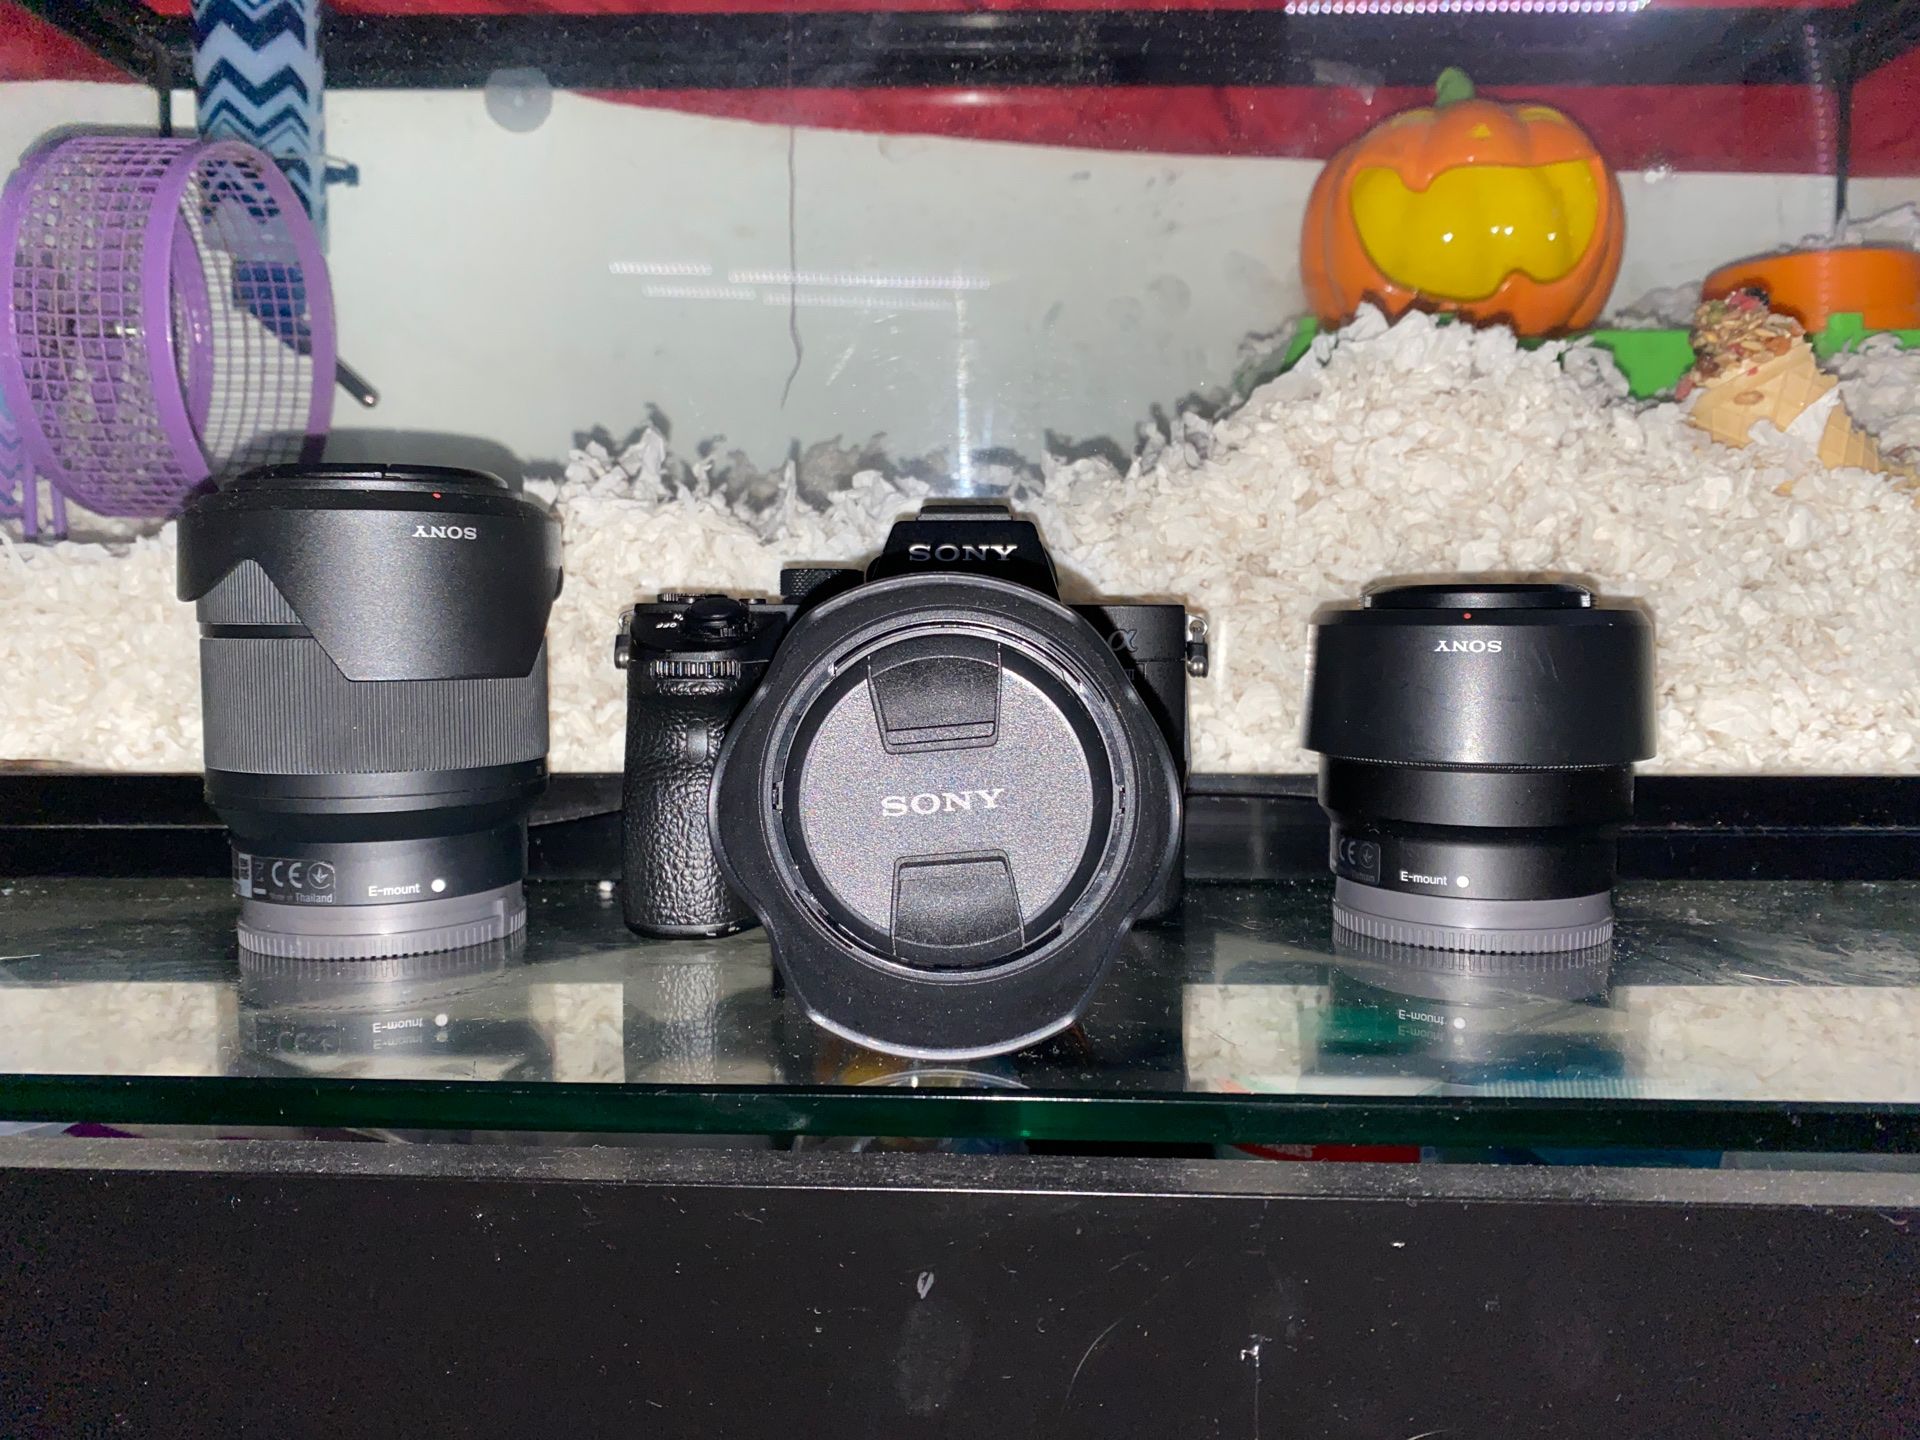 Sony A7III Body + 3 Lenses For Sale!!!